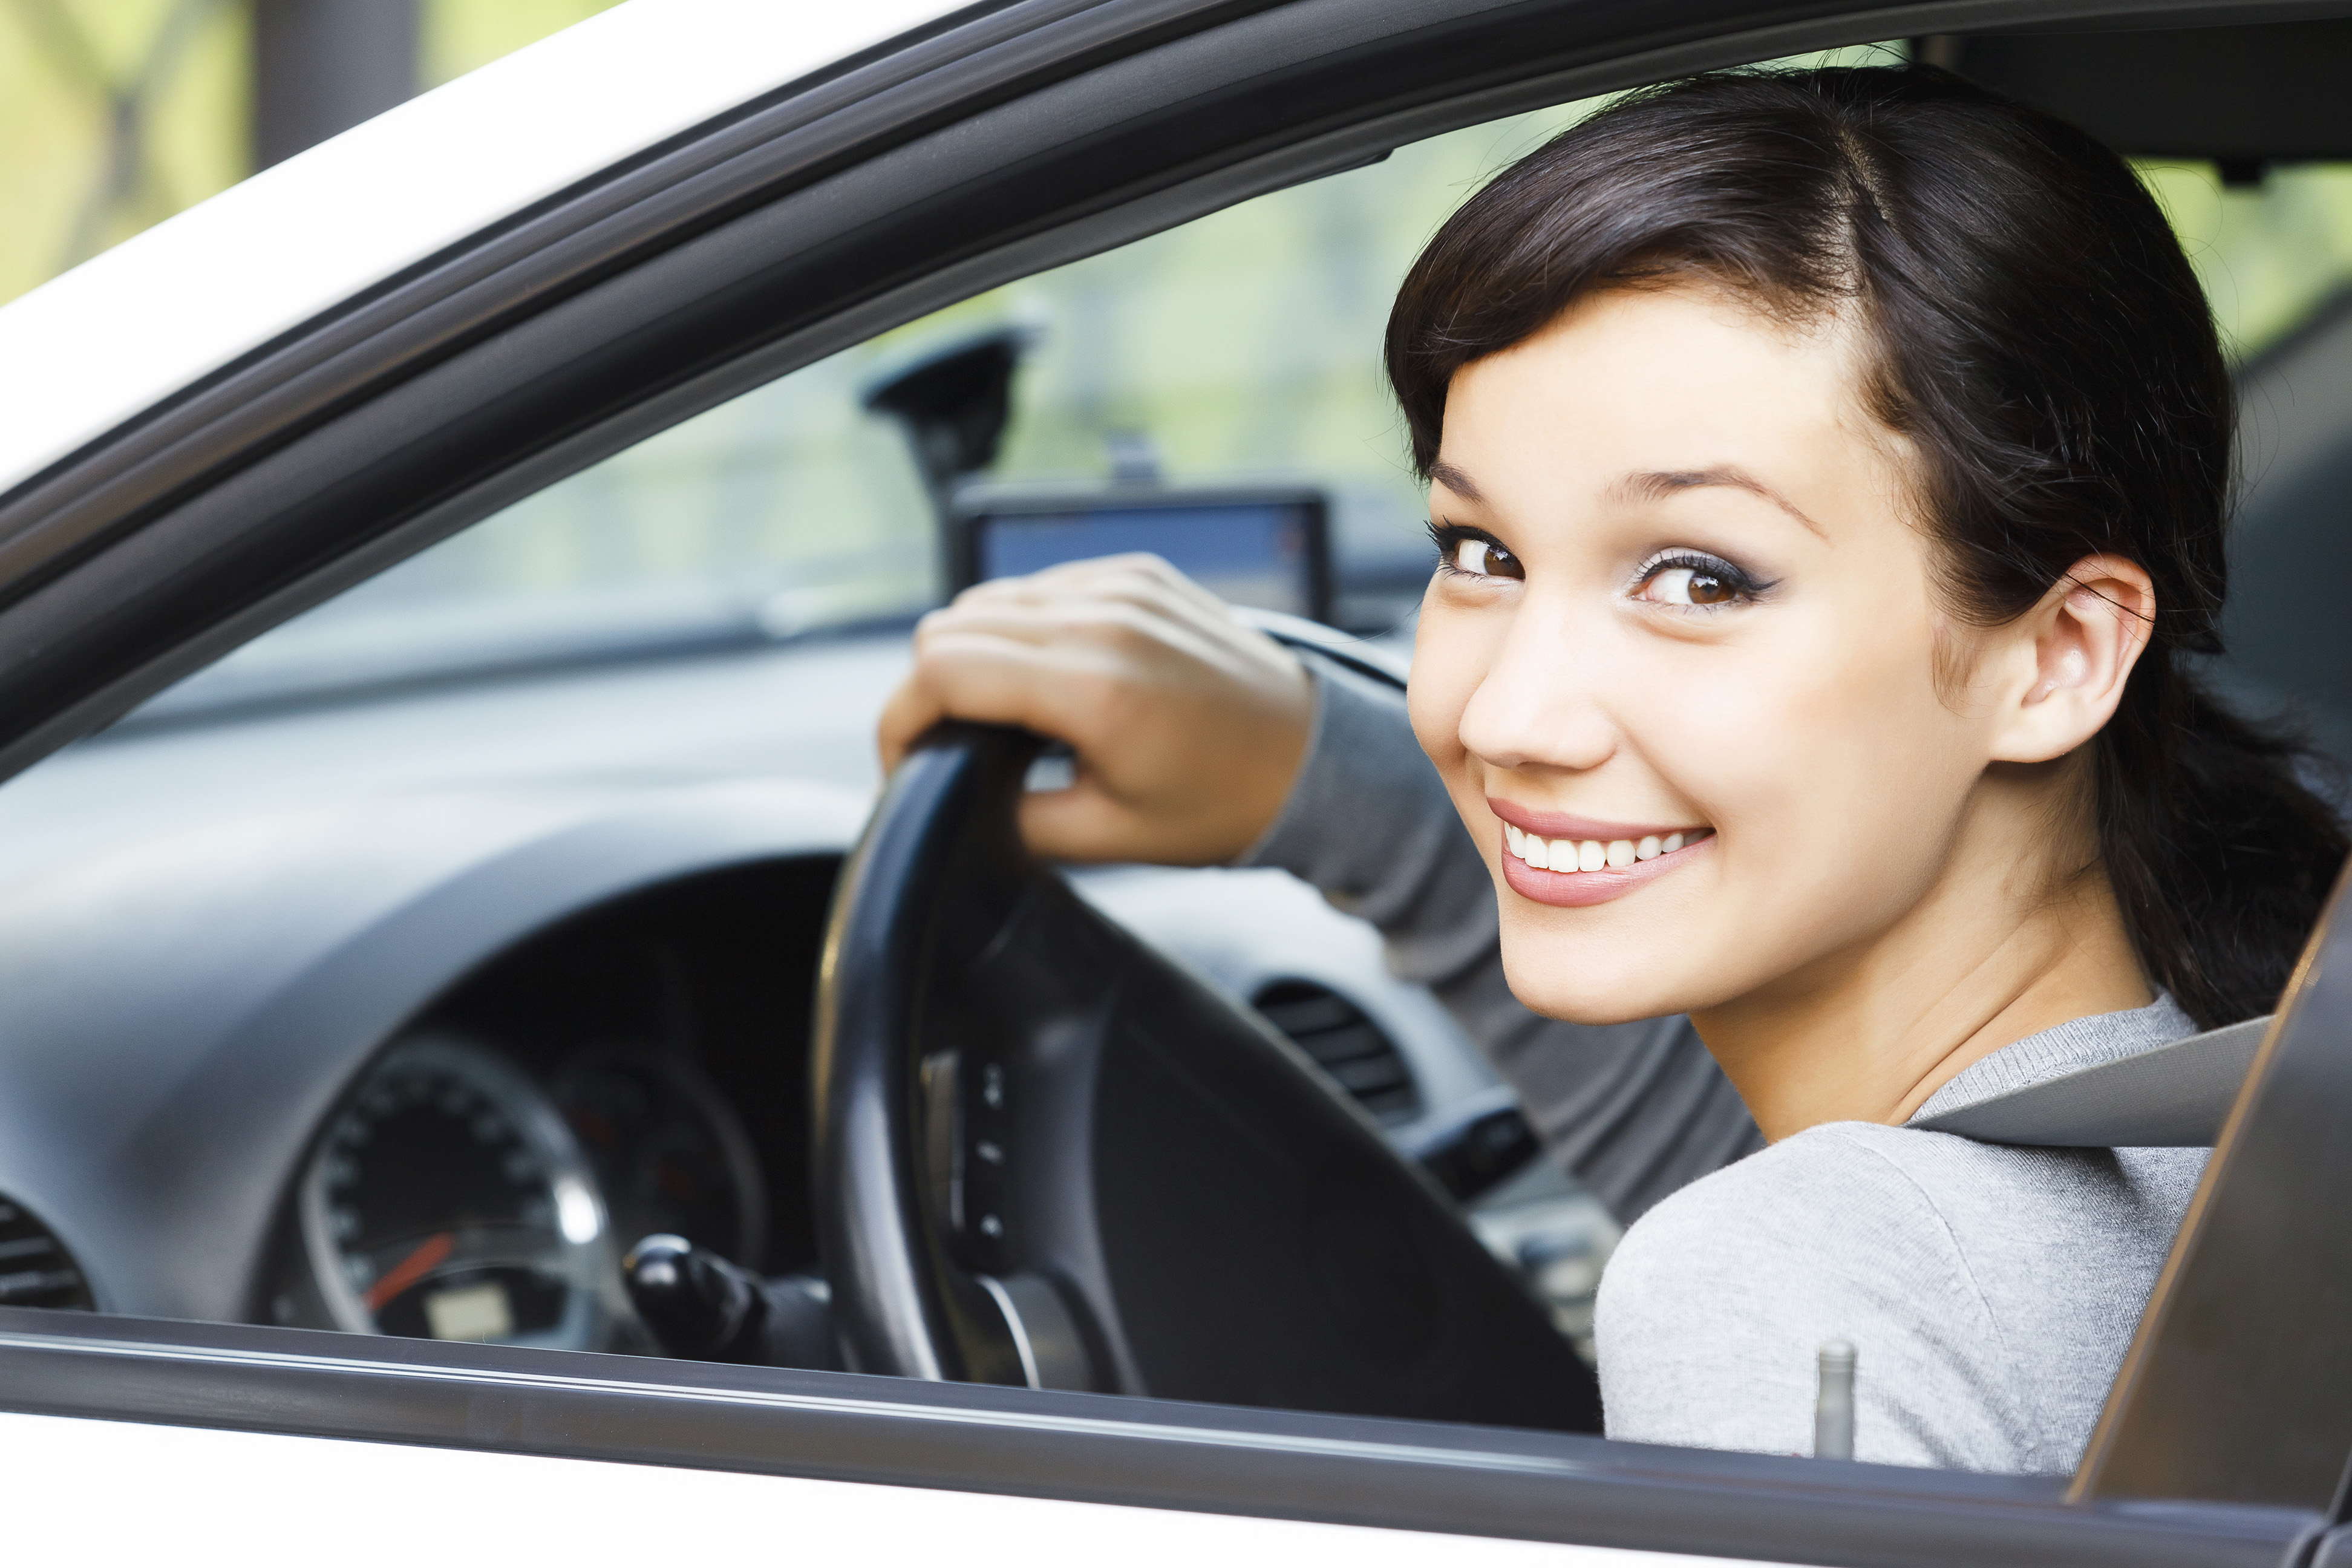 5 Quick Ways To Learn Driving